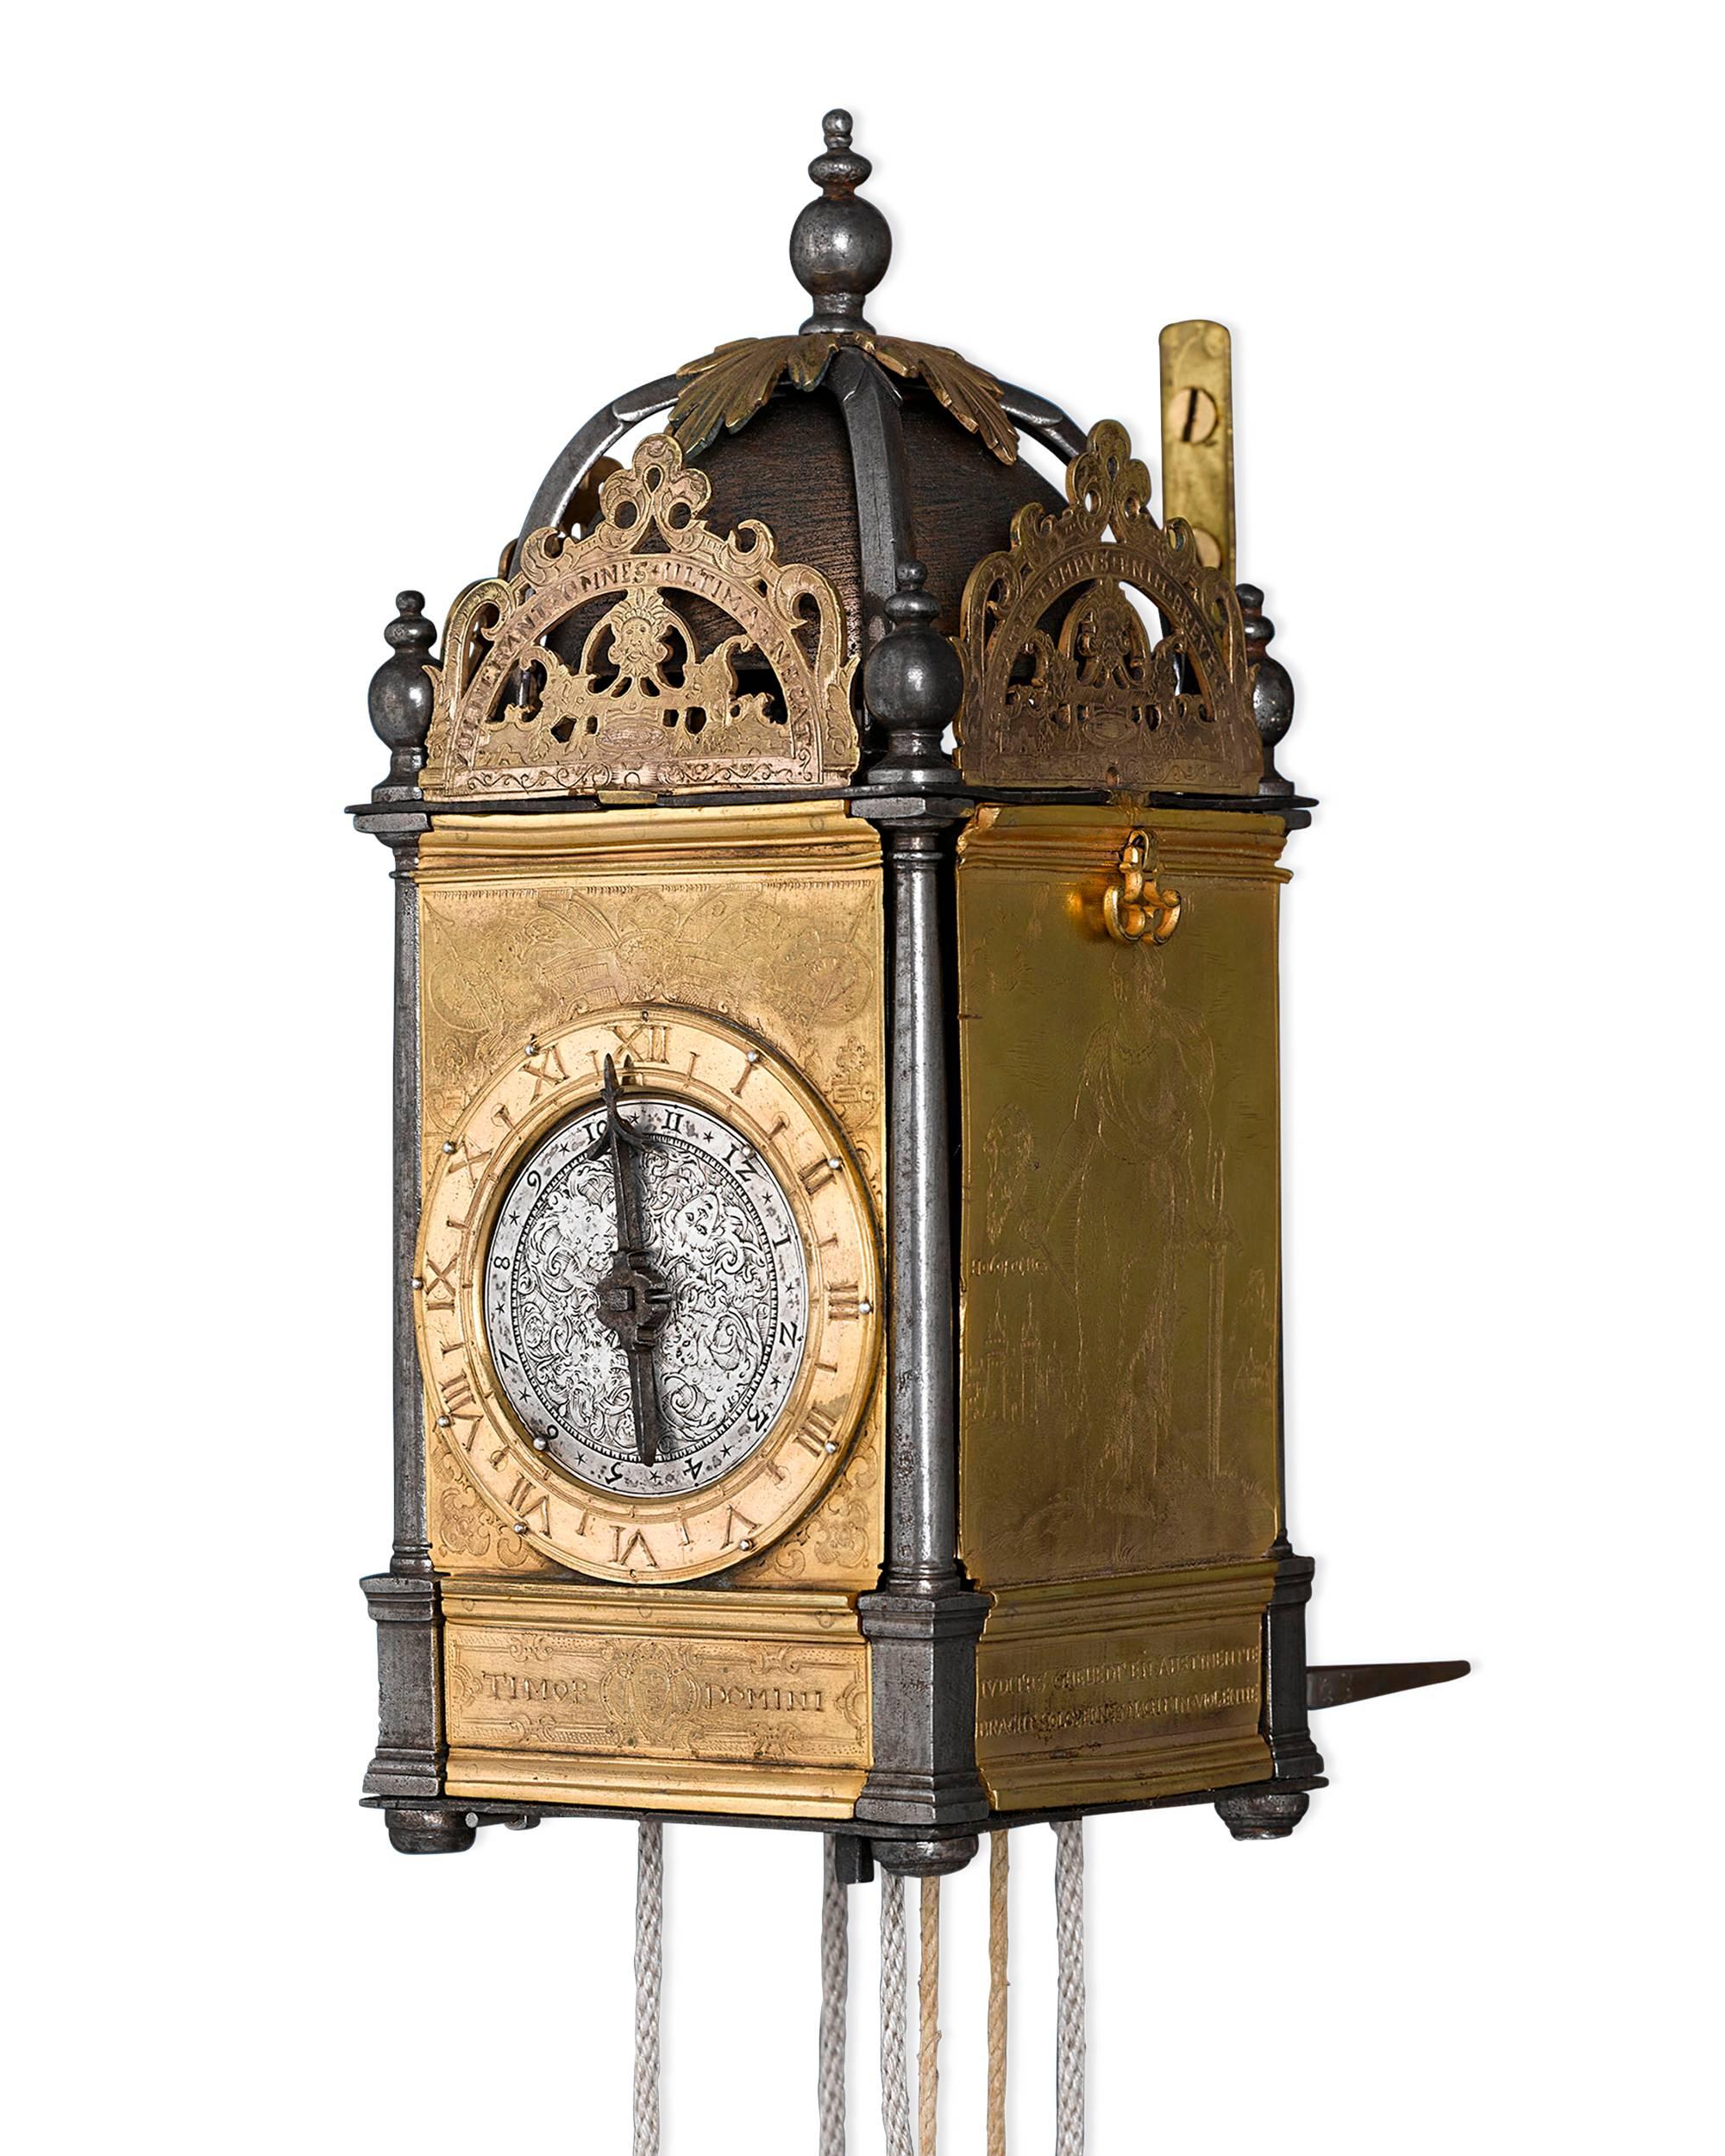 This immensely rare Renaissance turret wall clock was once part of the Time Museum's collection in Rockford, Illinois. This incredible weight-driven piece is encased in firegilt brass, featuring exceptional figural engravings of the Old Testament